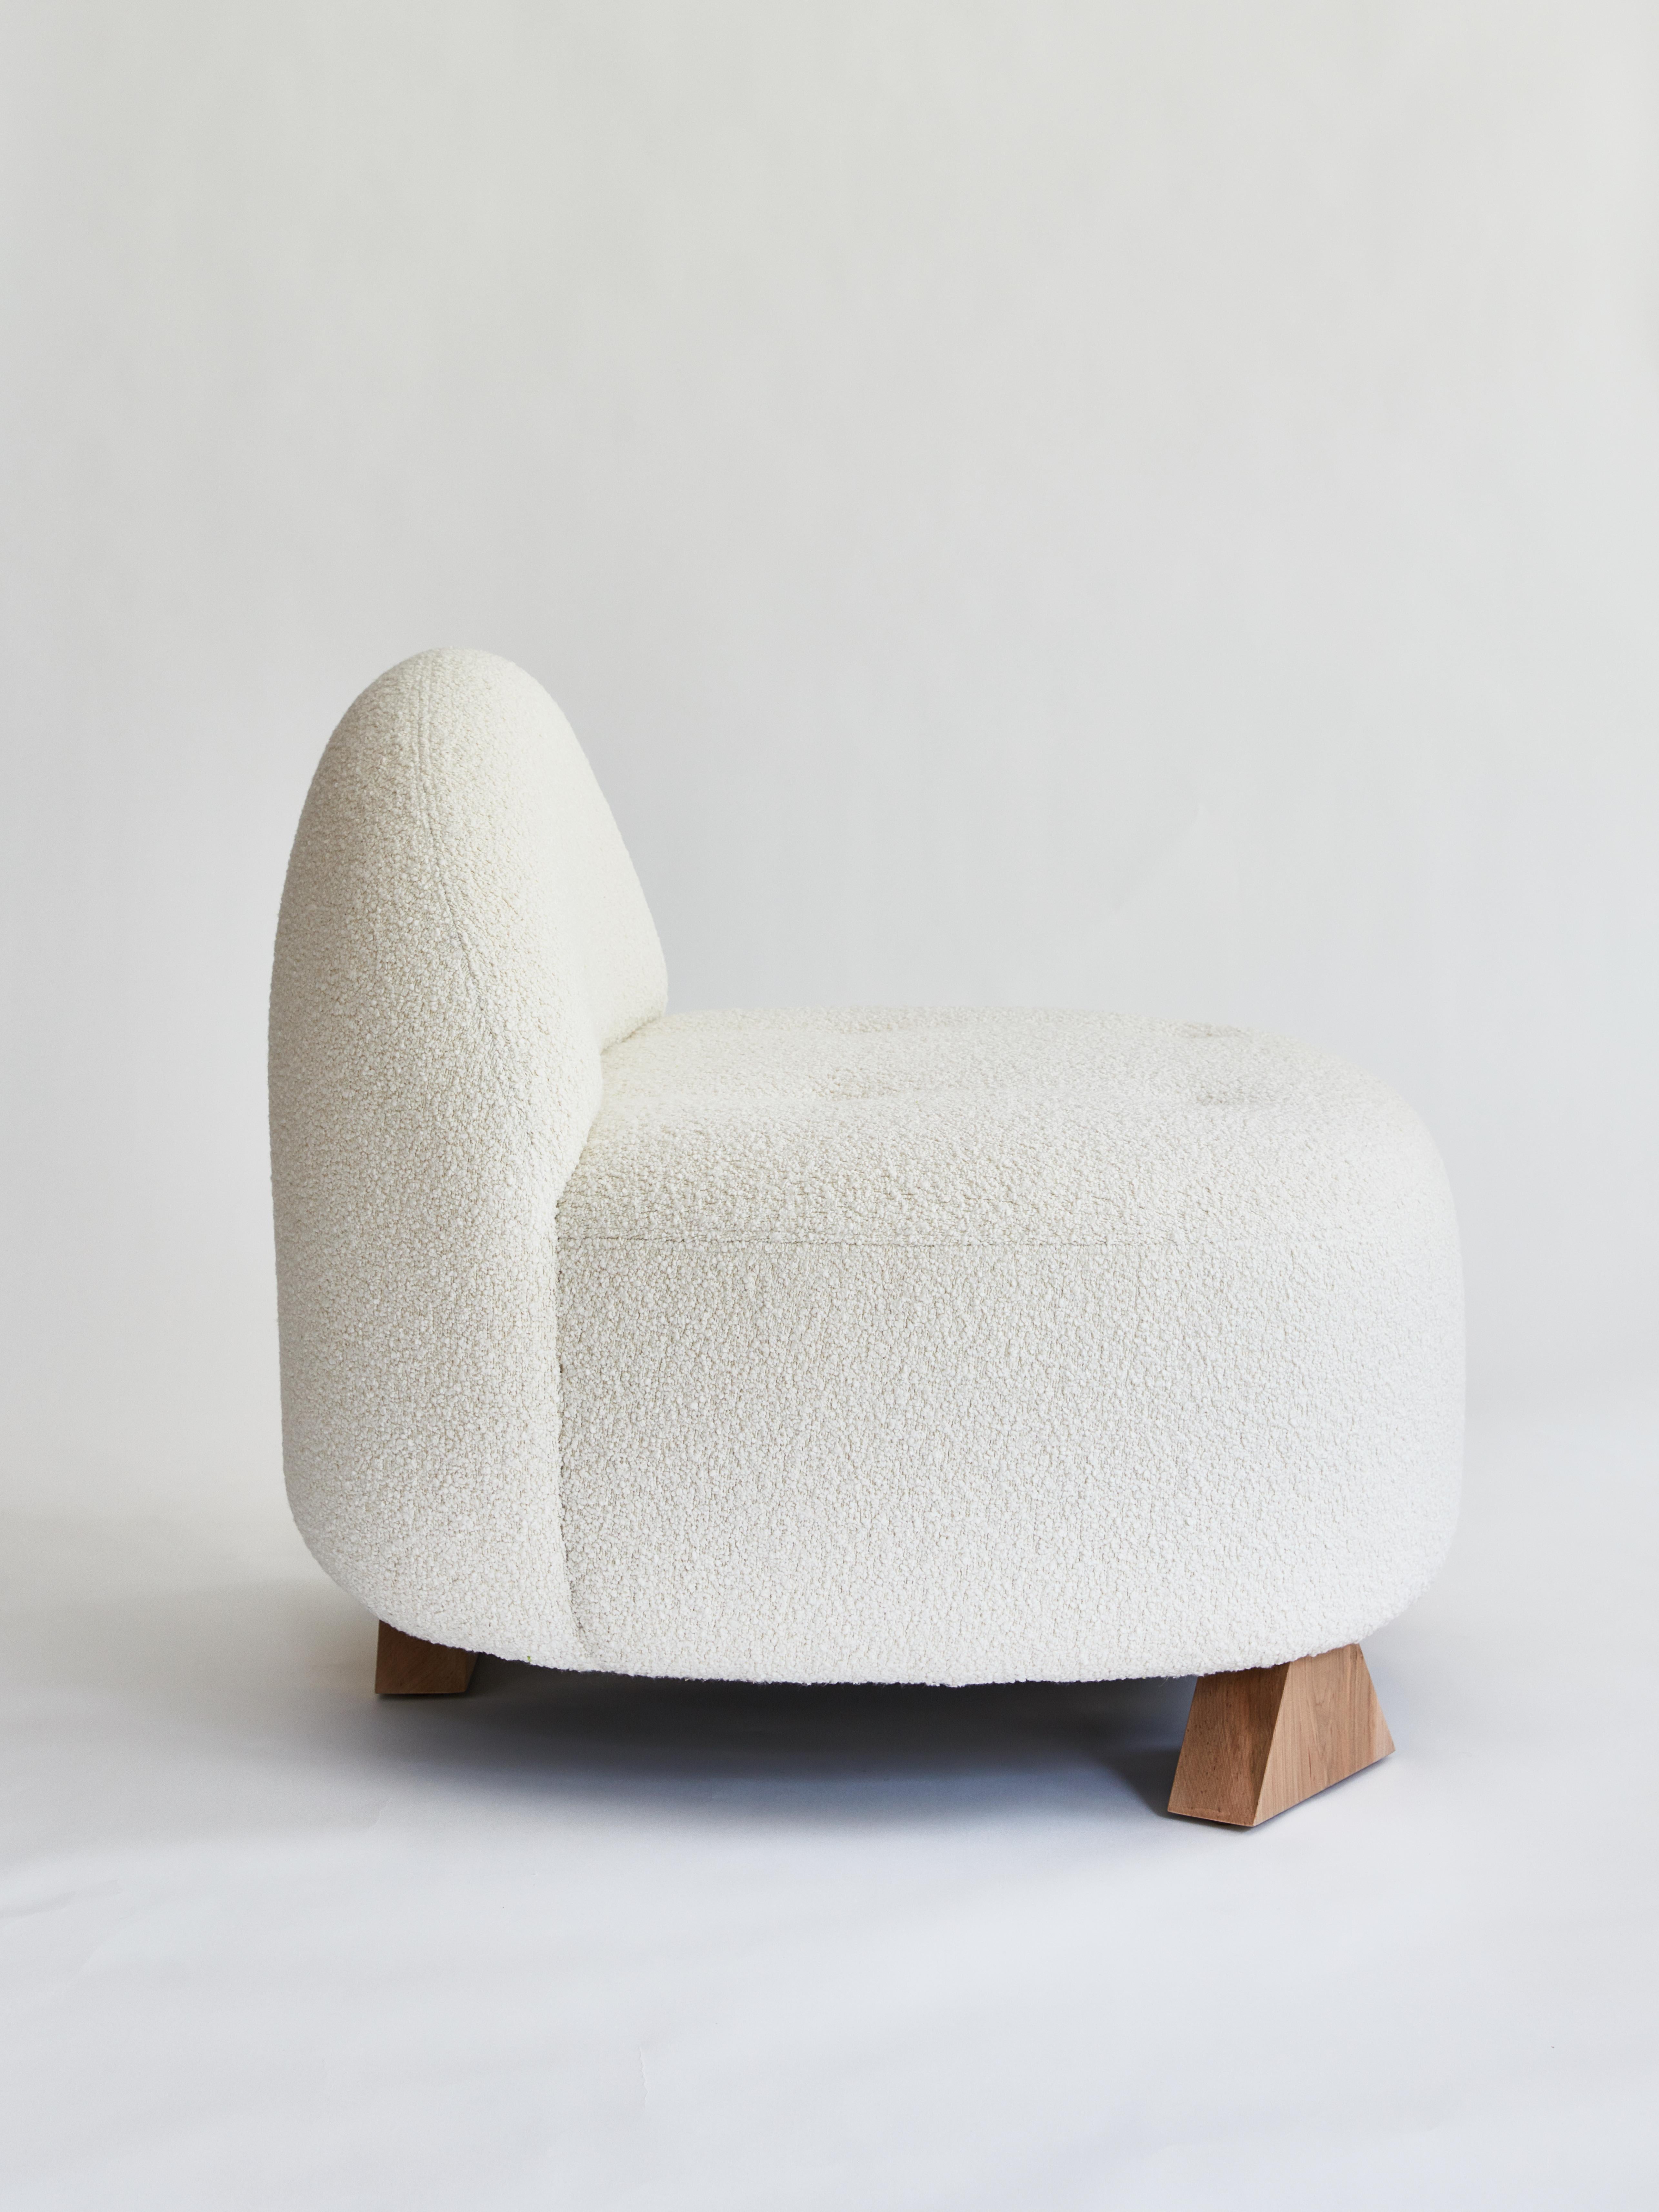 Made to order wood & bouclé club chair designed by Christian Siriano.

Legs: Stained Maple
Body: Ivory Bouclé

Measures: Seat height: 17”
Seat depth: 26” 

Overall height: 30” 
Overall depth: 31”
Overall width: 34”.
 